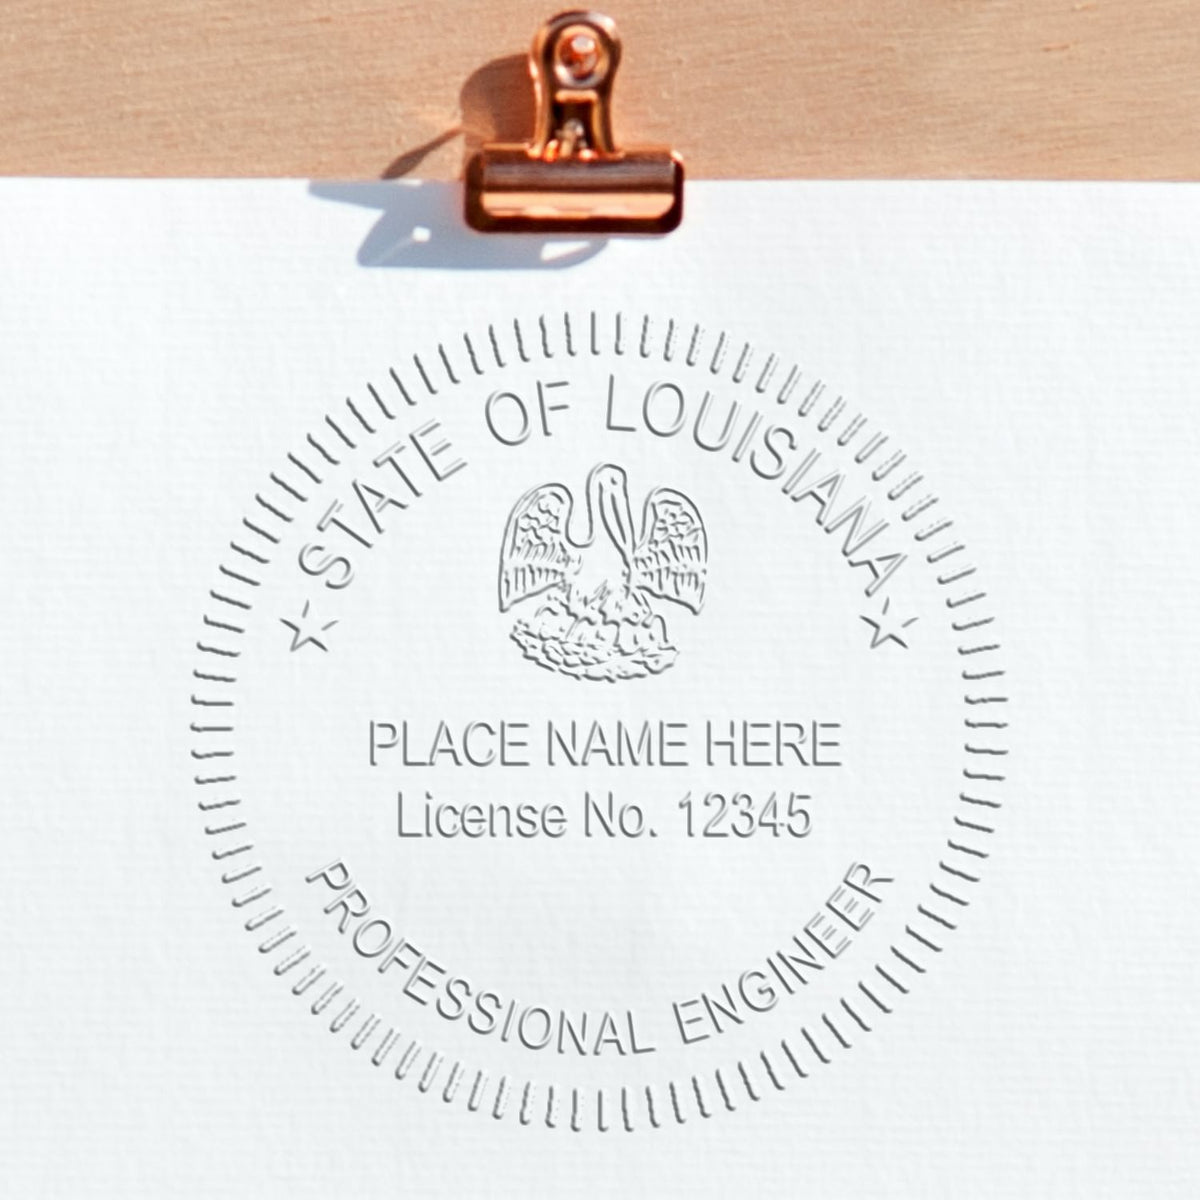 The Gift Louisiana Engineer Seal stamp impression comes to life with a crisp, detailed image stamped on paper - showcasing true professional quality.